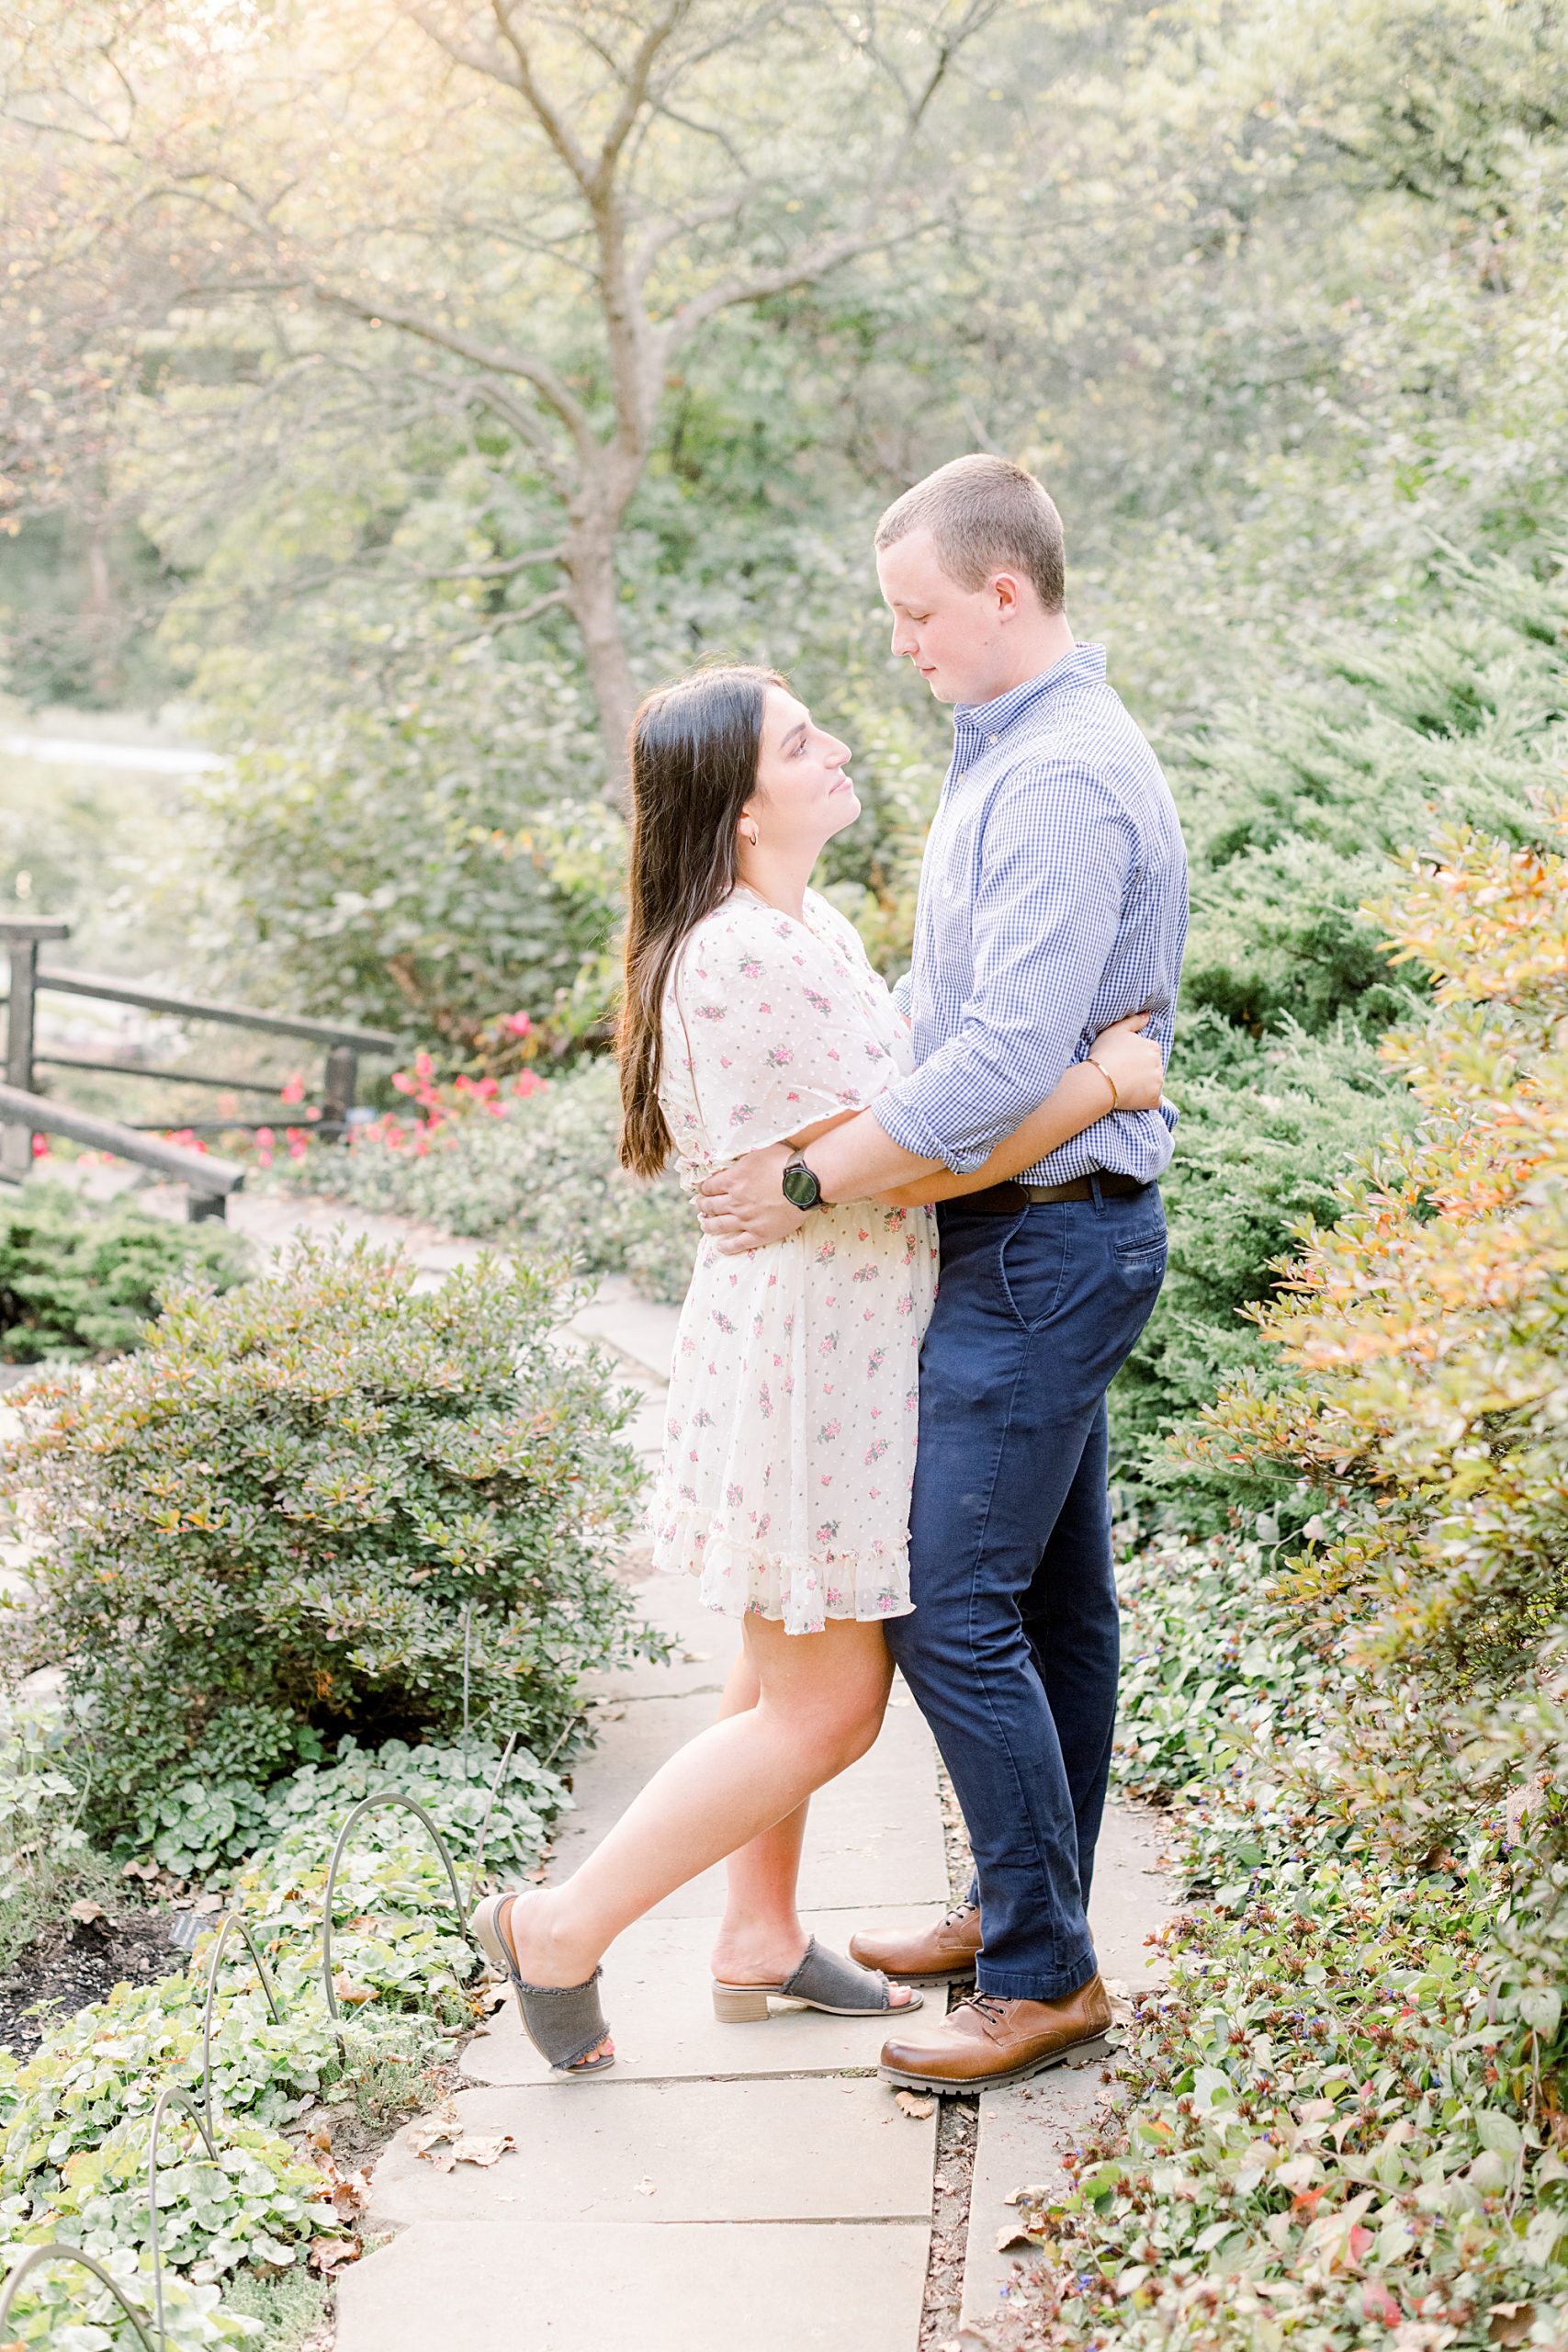 Couple embracing on garden path at Newfields in Indianapolis. The woman is wearing a short white dress and the man is in a blue dress shirt.